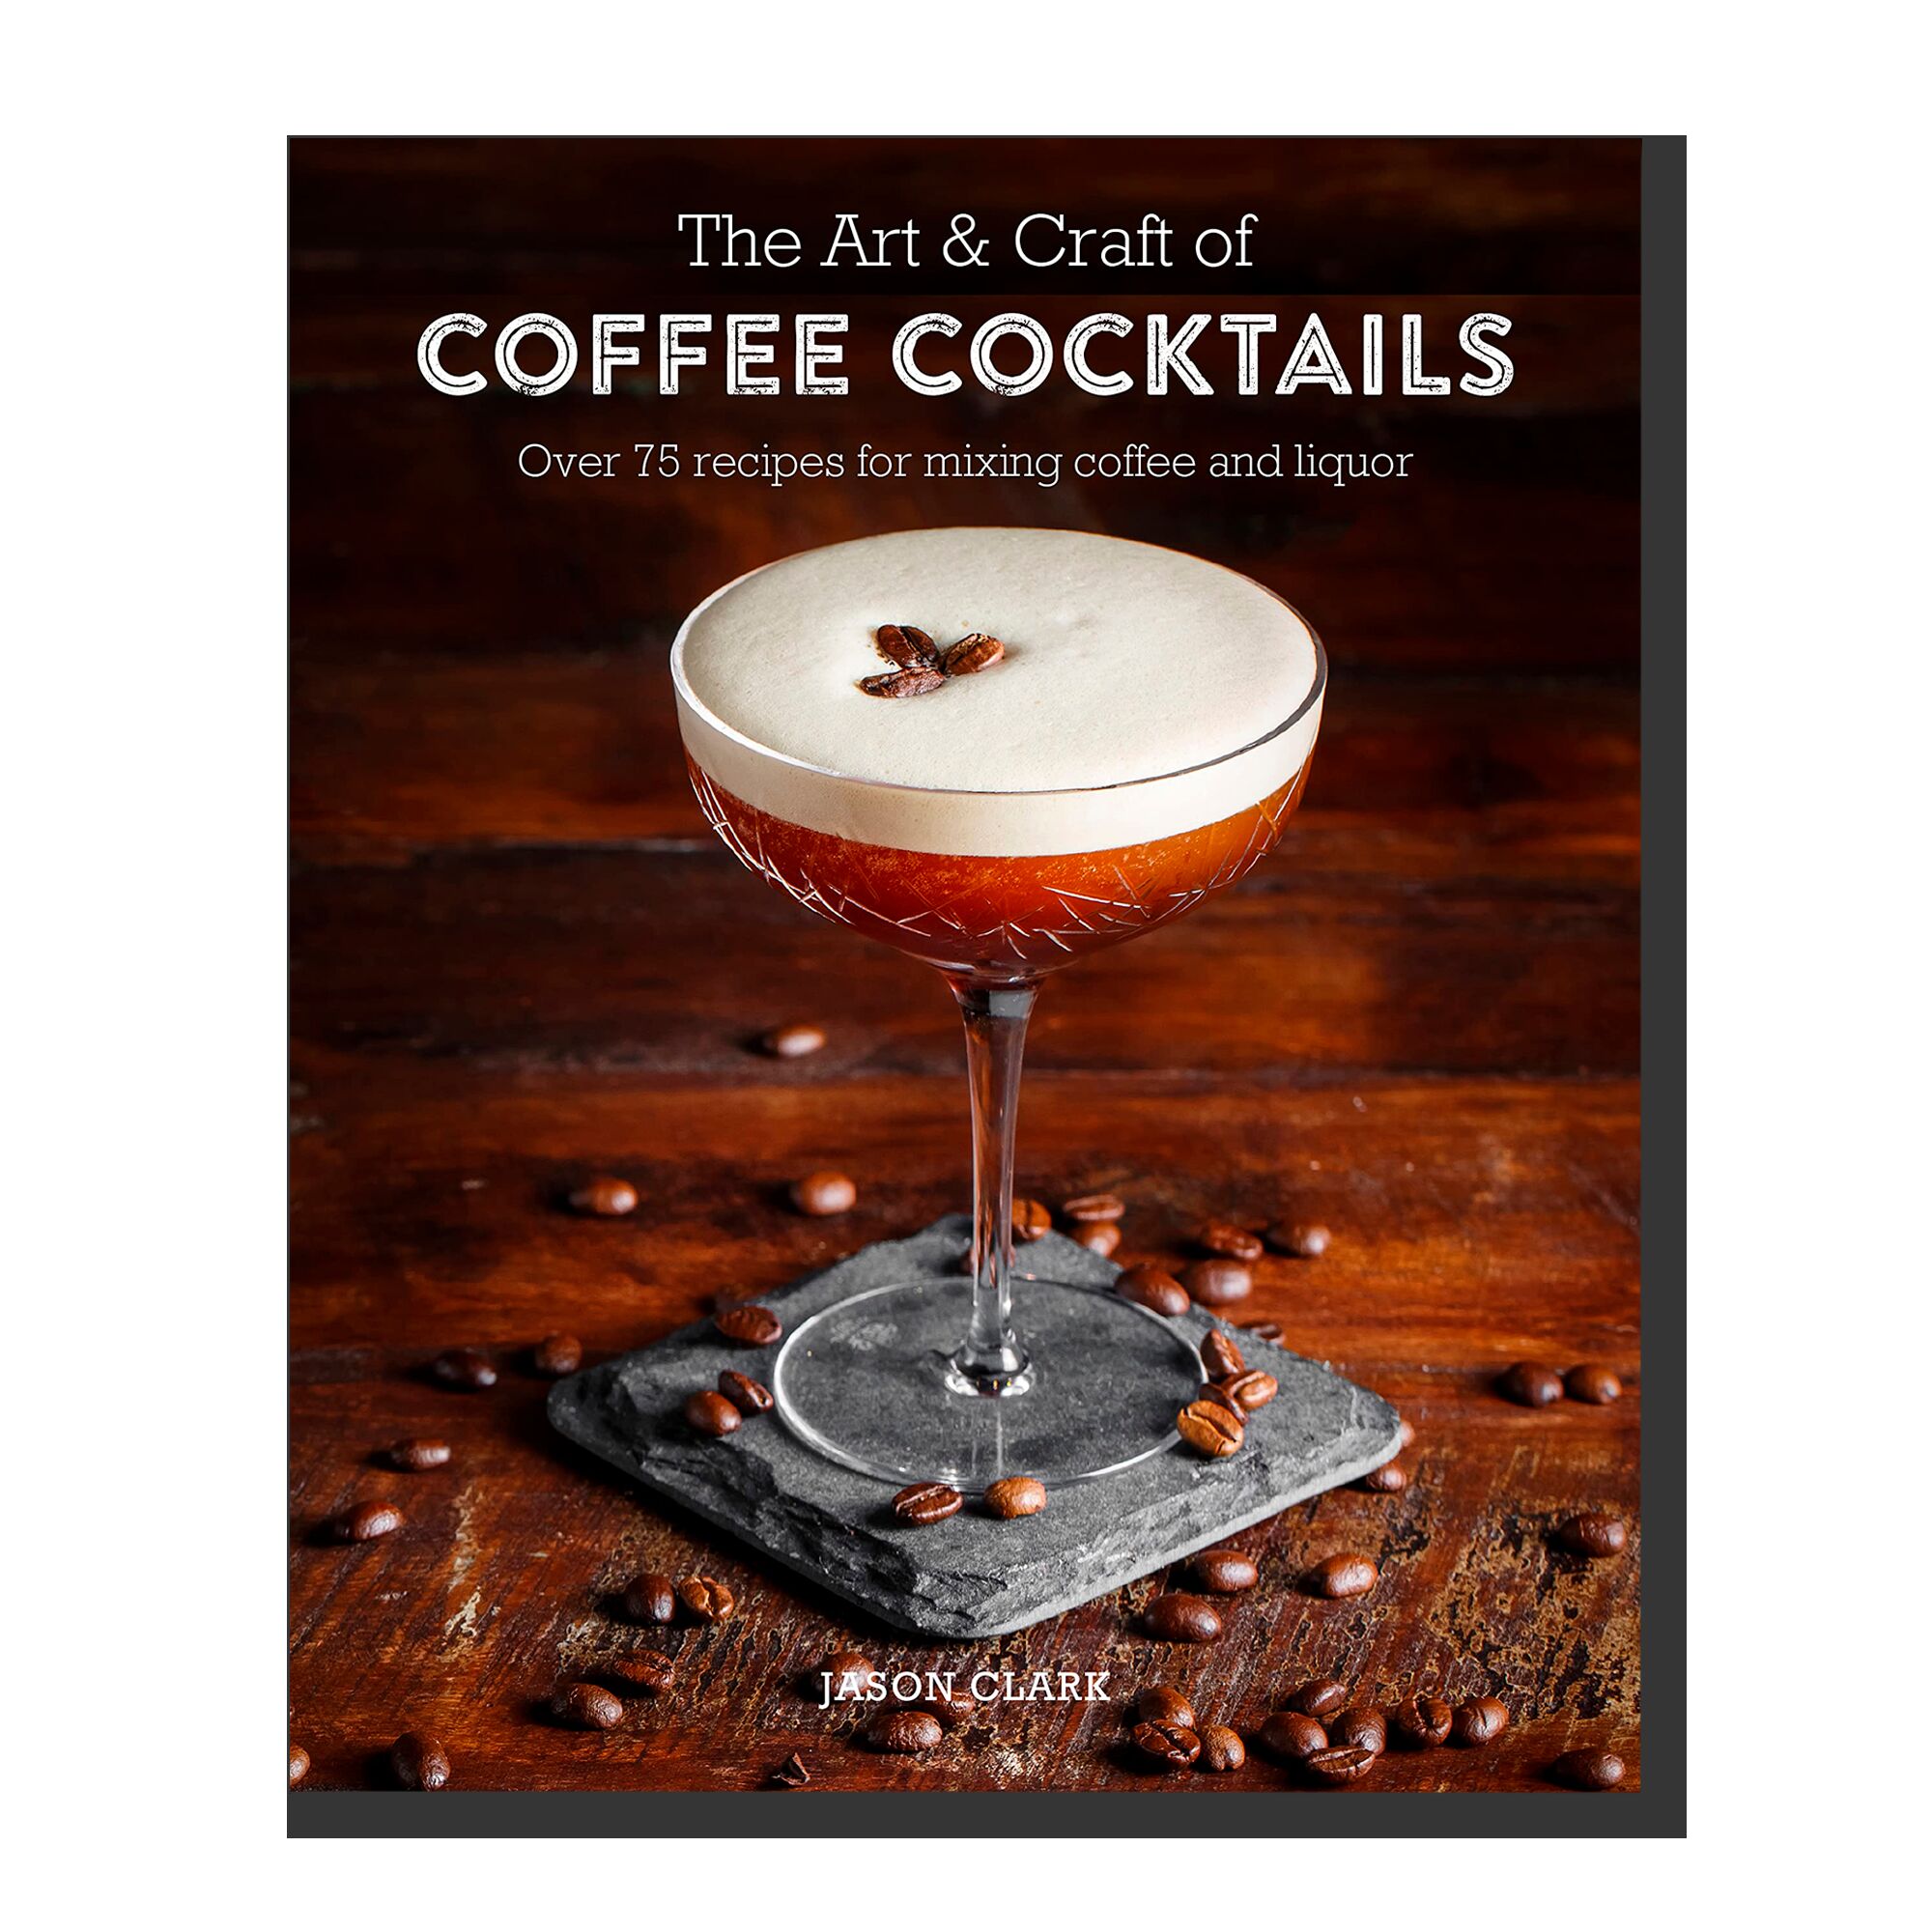 The Art & Craft of Coffee Cocktails: Over 80 recipes for mixing coffee and liquor